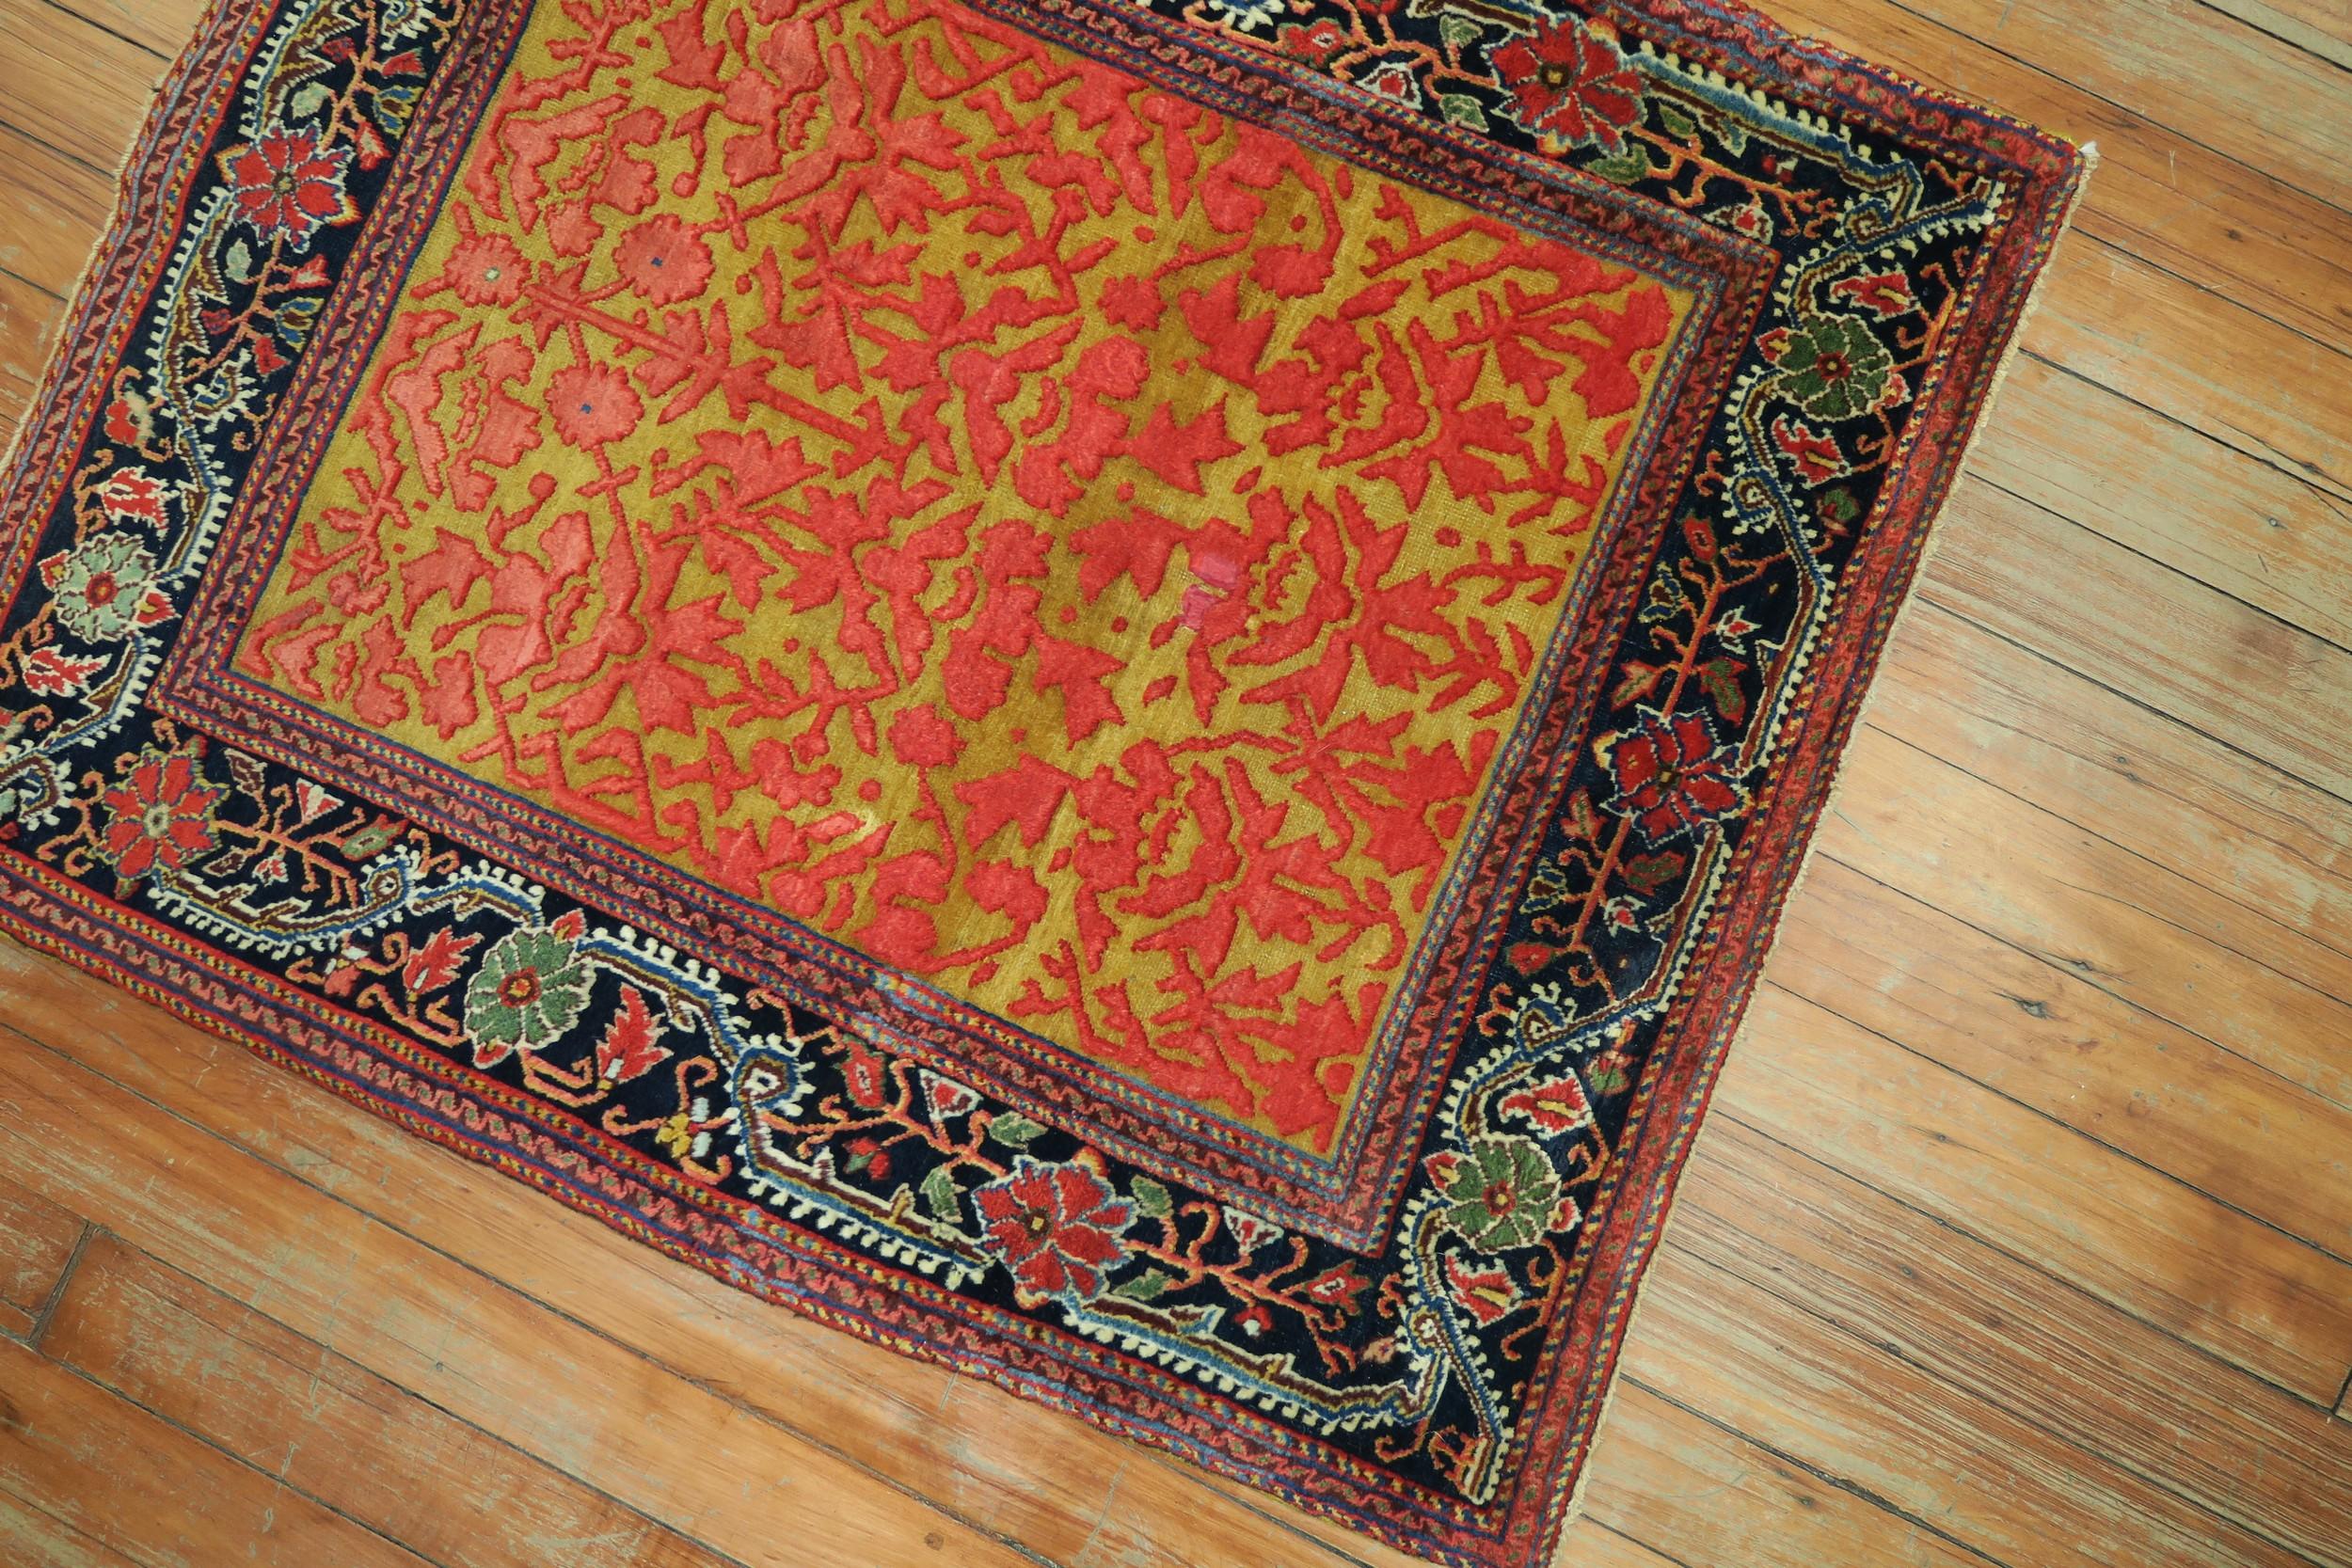 Hand-Woven Jewel Tone Early 20th Century Superfine Quality Antique Persian Jozan Souf Mat For Sale